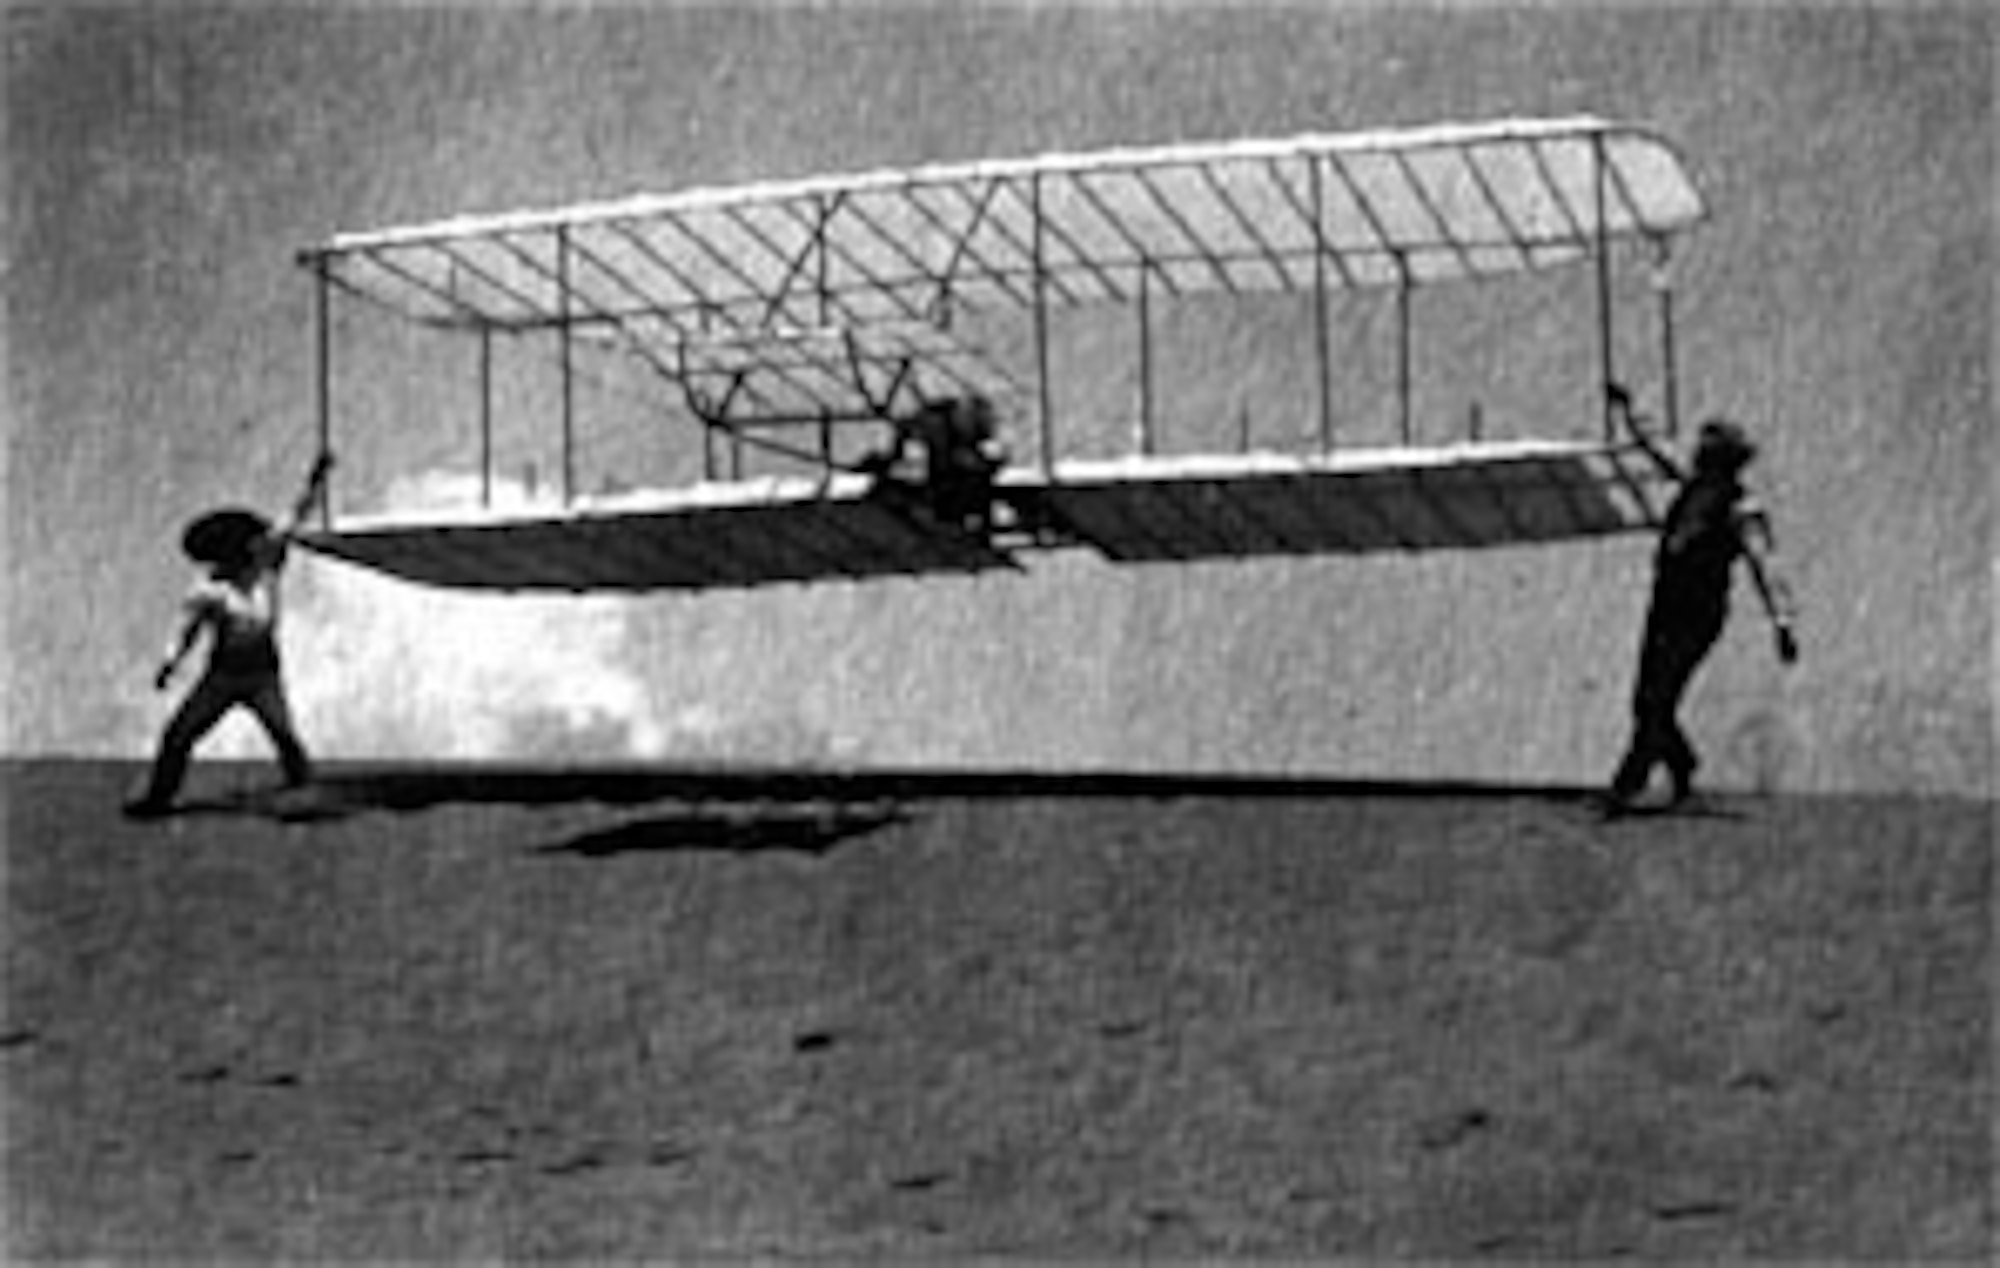 The second Wright glider was flown at Kitty Hawk, N.C., in July and August 1901. (U.S. Air Force photo)